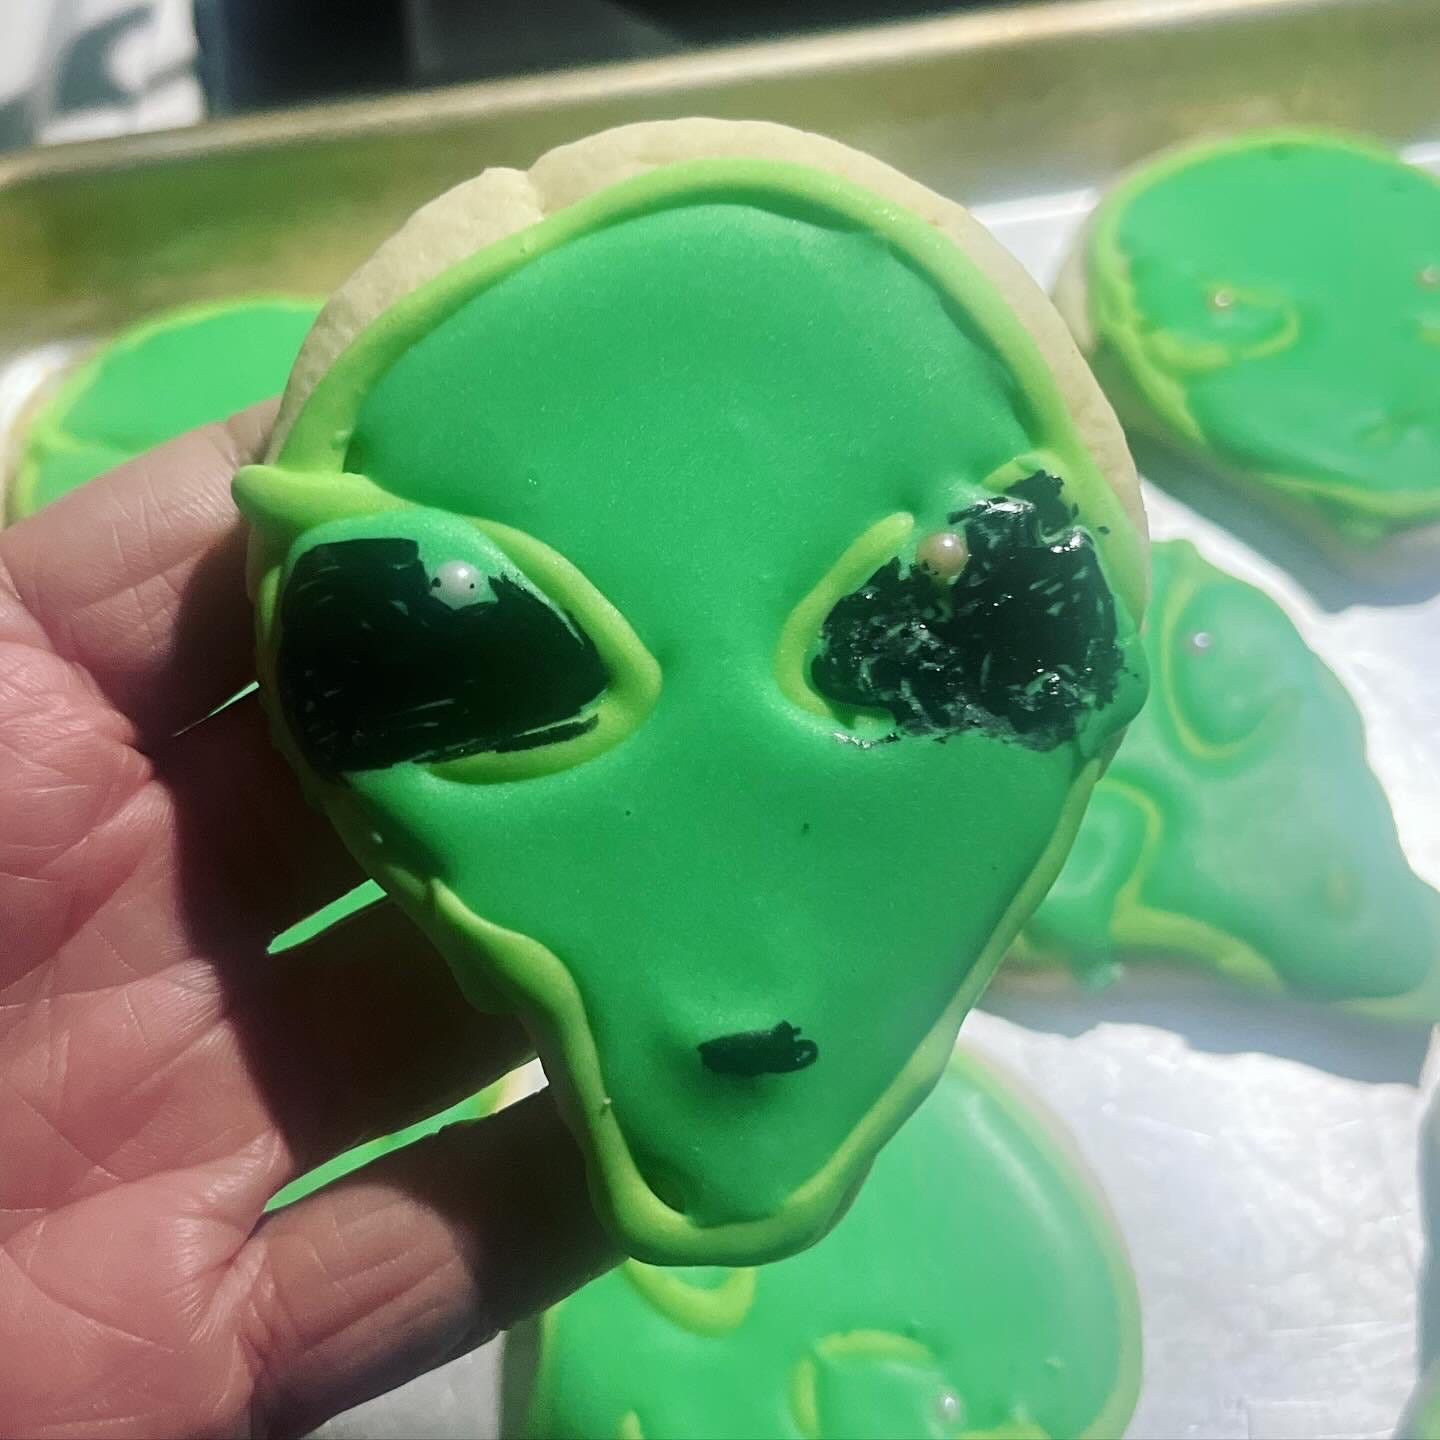 An alien-head shaped sugar cookie topped with royal icing in two shades of green. The alien has black eyes with a round sprinkle as a highlight.